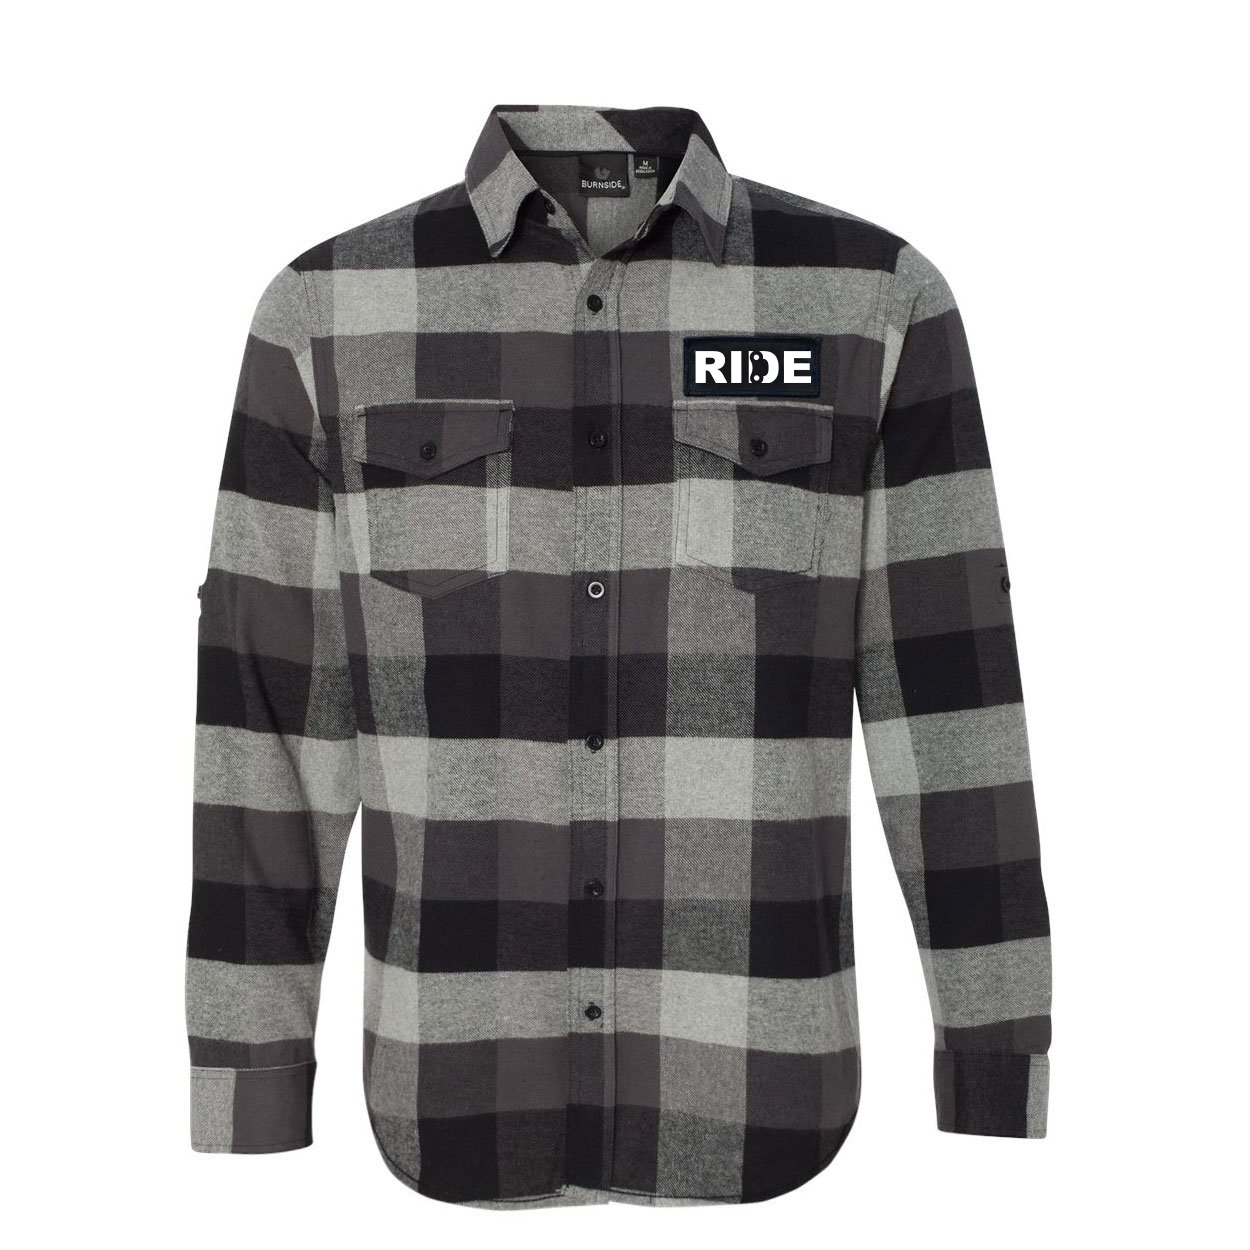 Ride Chain Logo Classic Unisex Long Sleeve Woven Patch Flannel Shirt Black/Gray (White Logo)